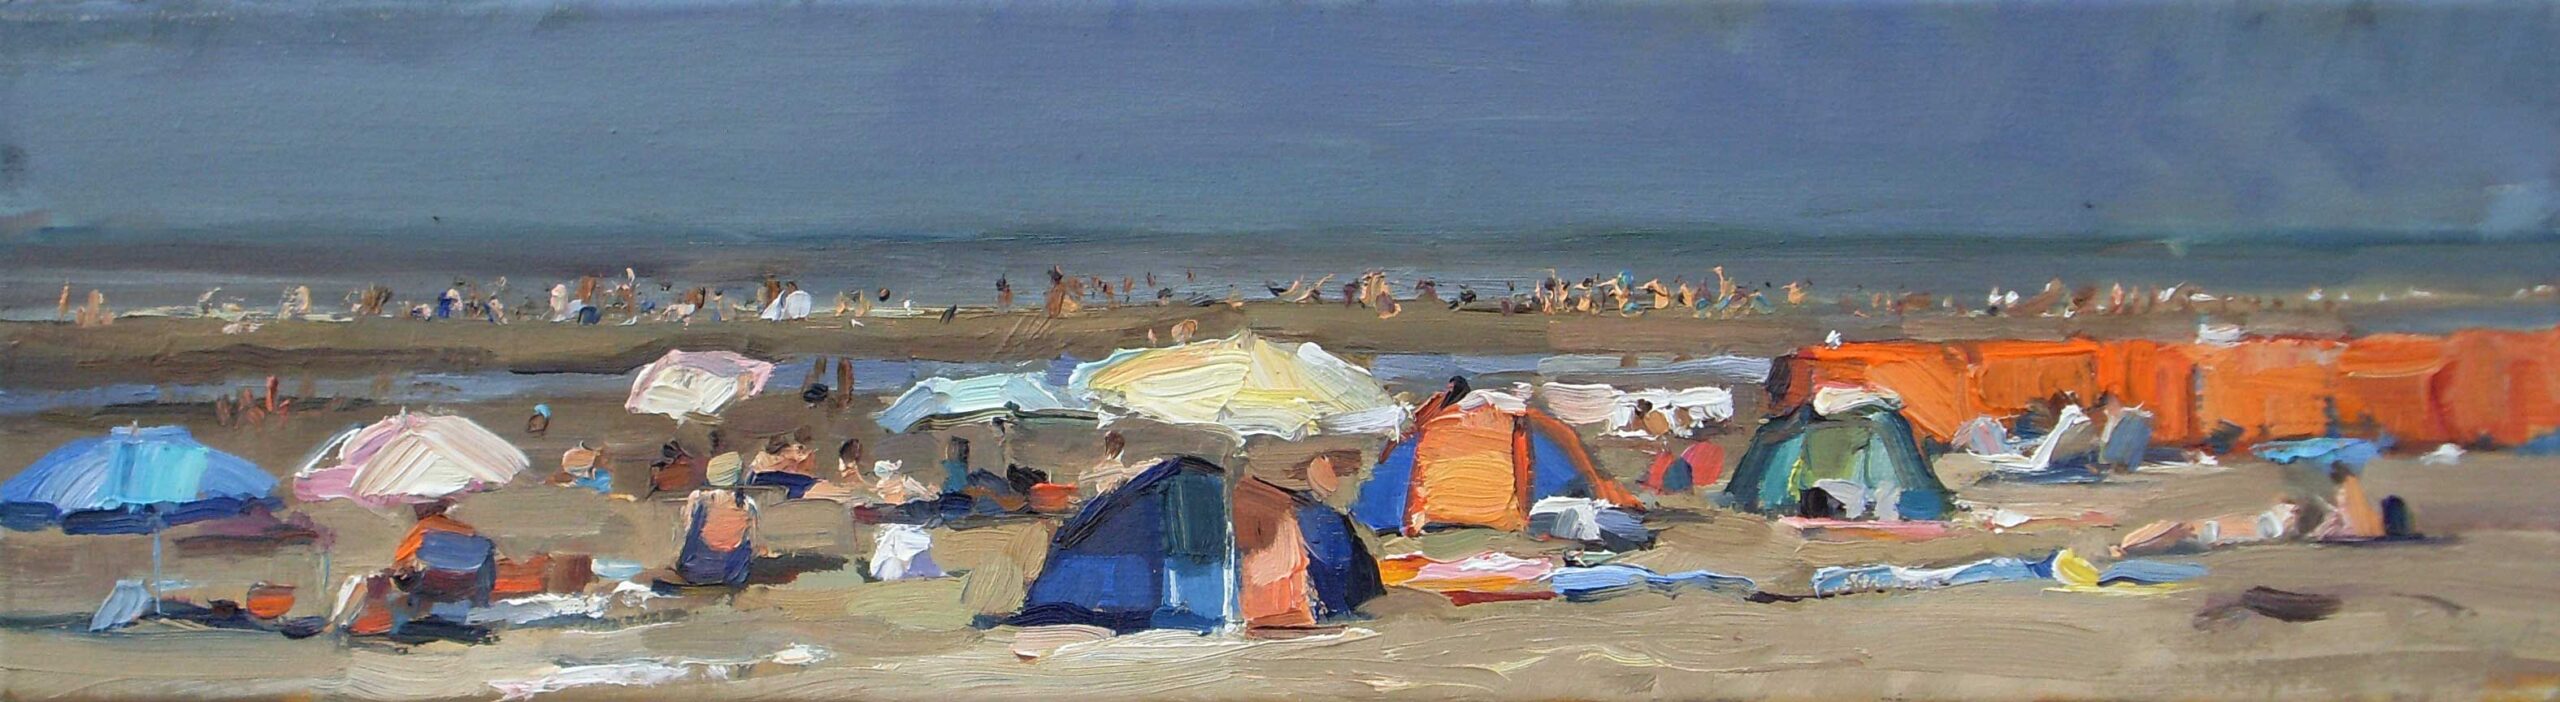 Roos Schuring, "Last Summersday," 20 x 70 cm, Oil on canvas